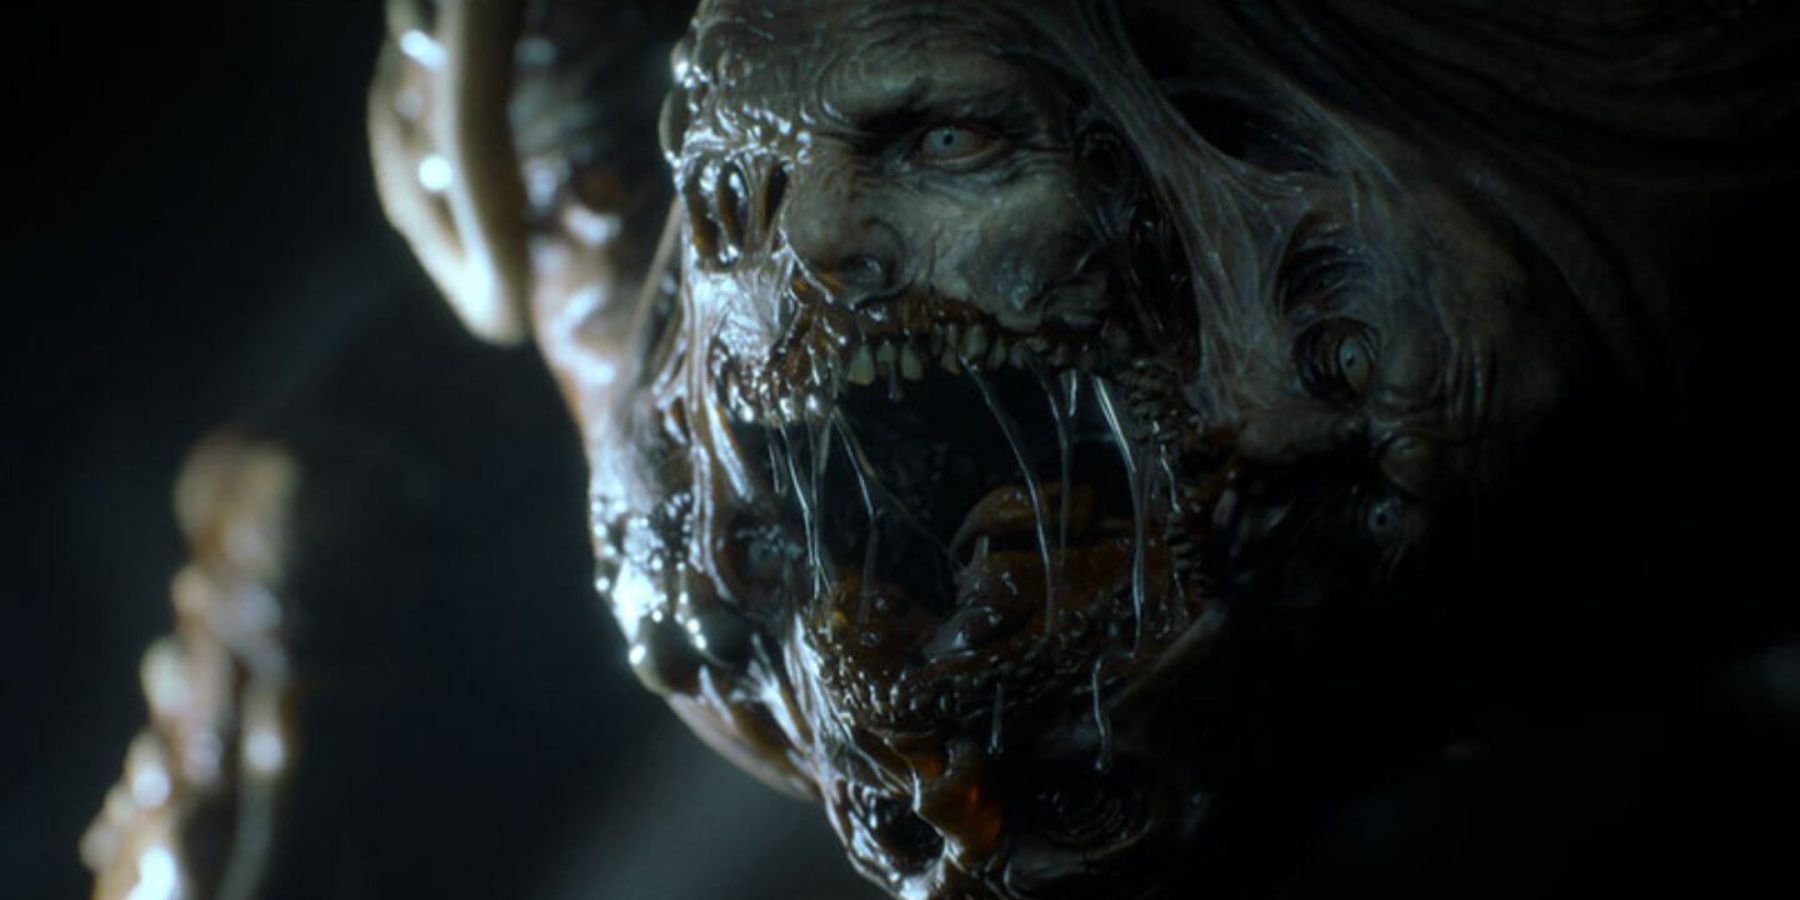 Image from The Callisto Protocol showing a gruesome monster screaming.